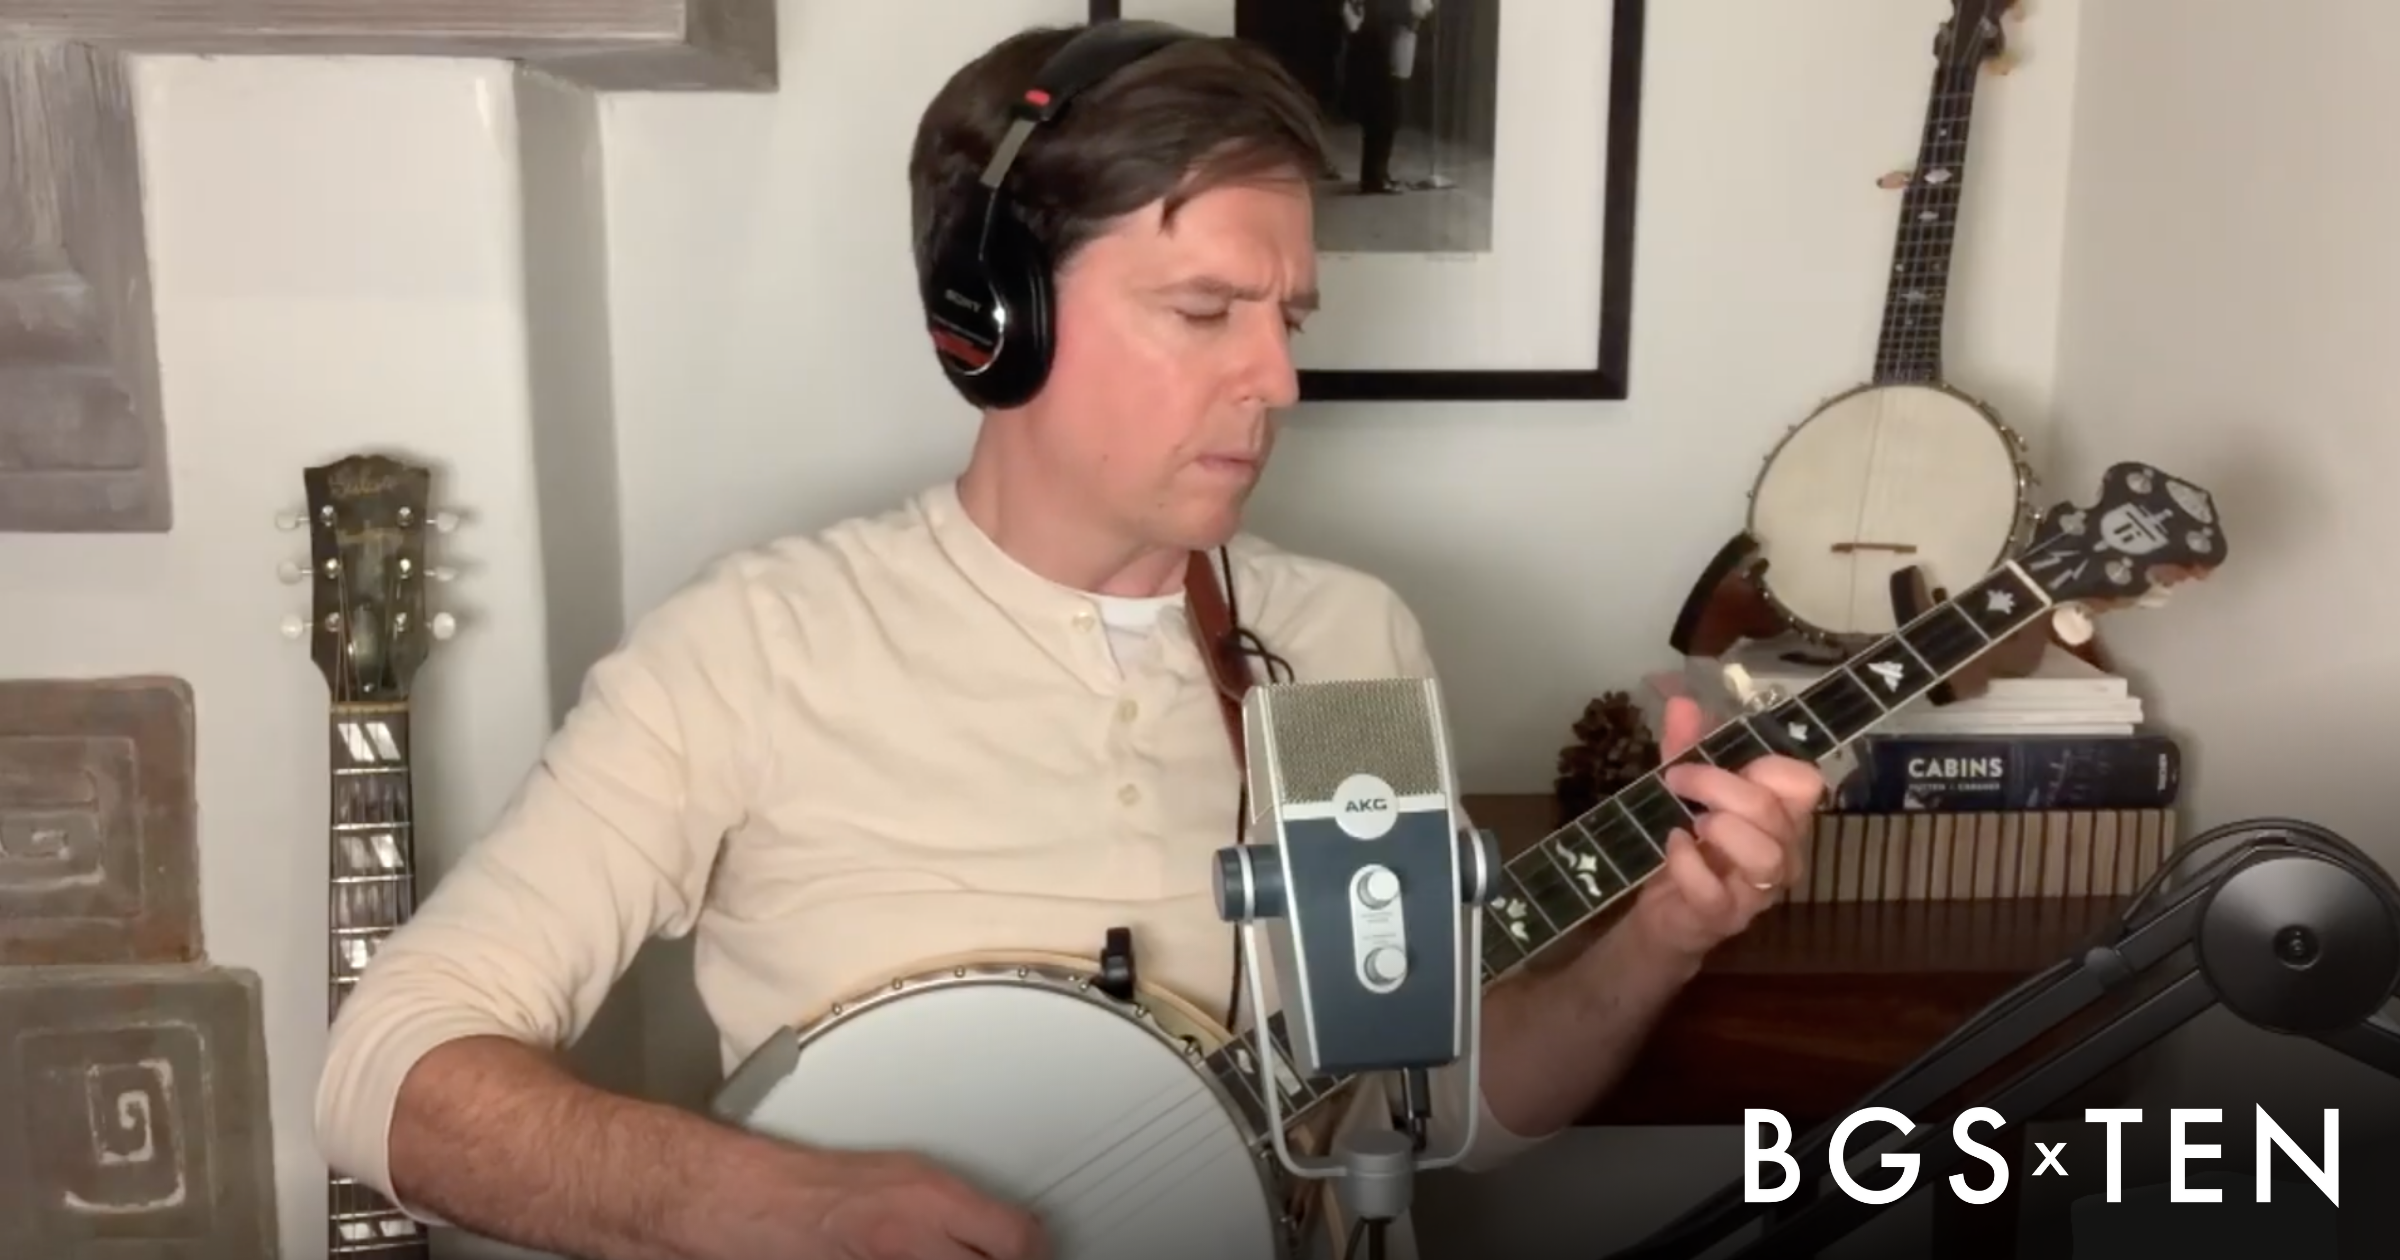 Seeking Bluegrass in LA, Ed Helms & Amy Reitnouer Jacobs Made a Scene With BGS